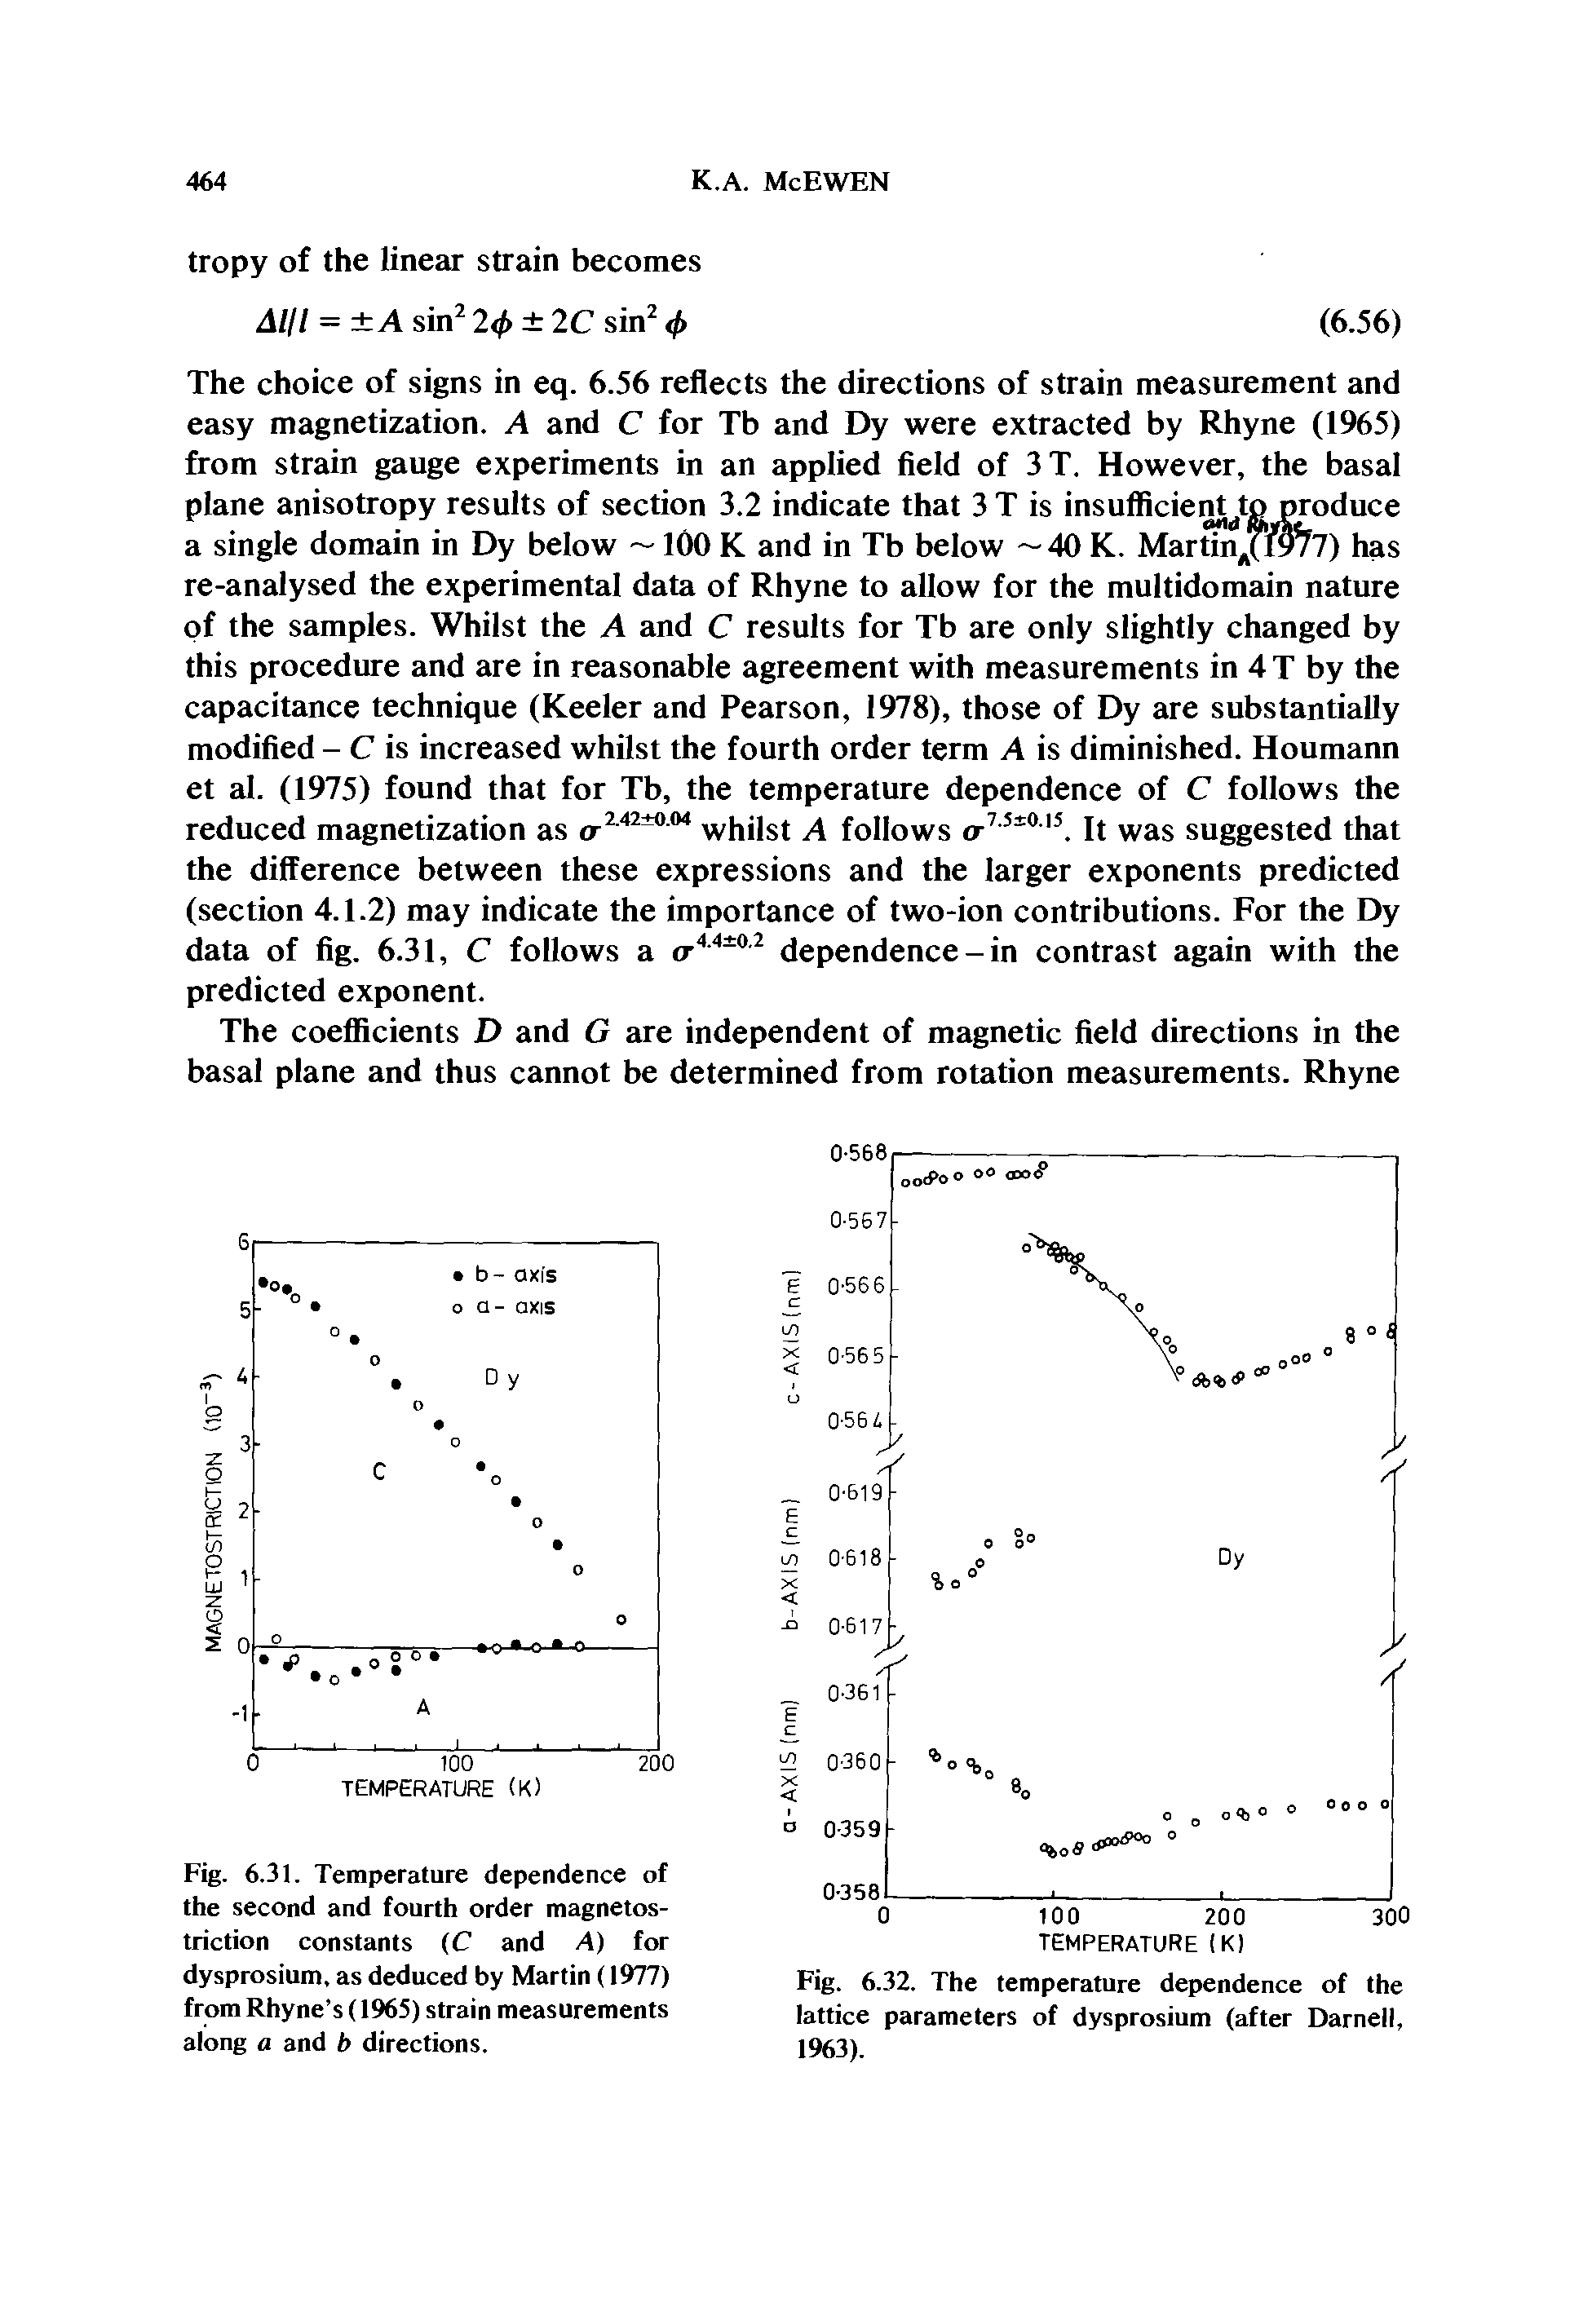 Fig. 6.32. The temperature dependence of the lattice parameters of dysprosium (after Darnell, 1963).